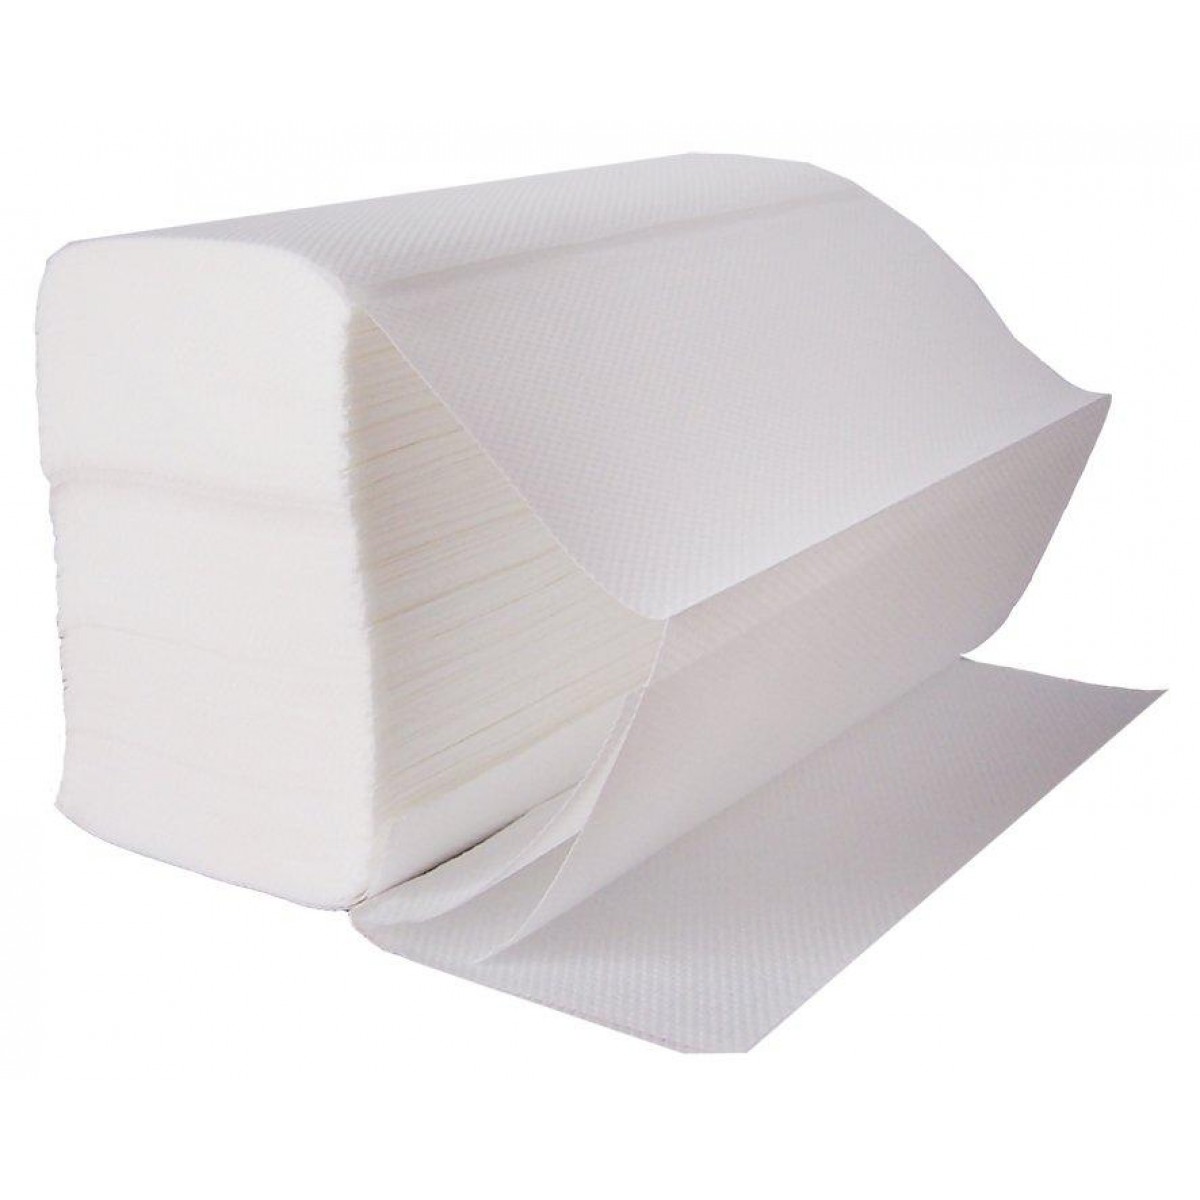 2 Ply White 'Z' Fold Hand Towels